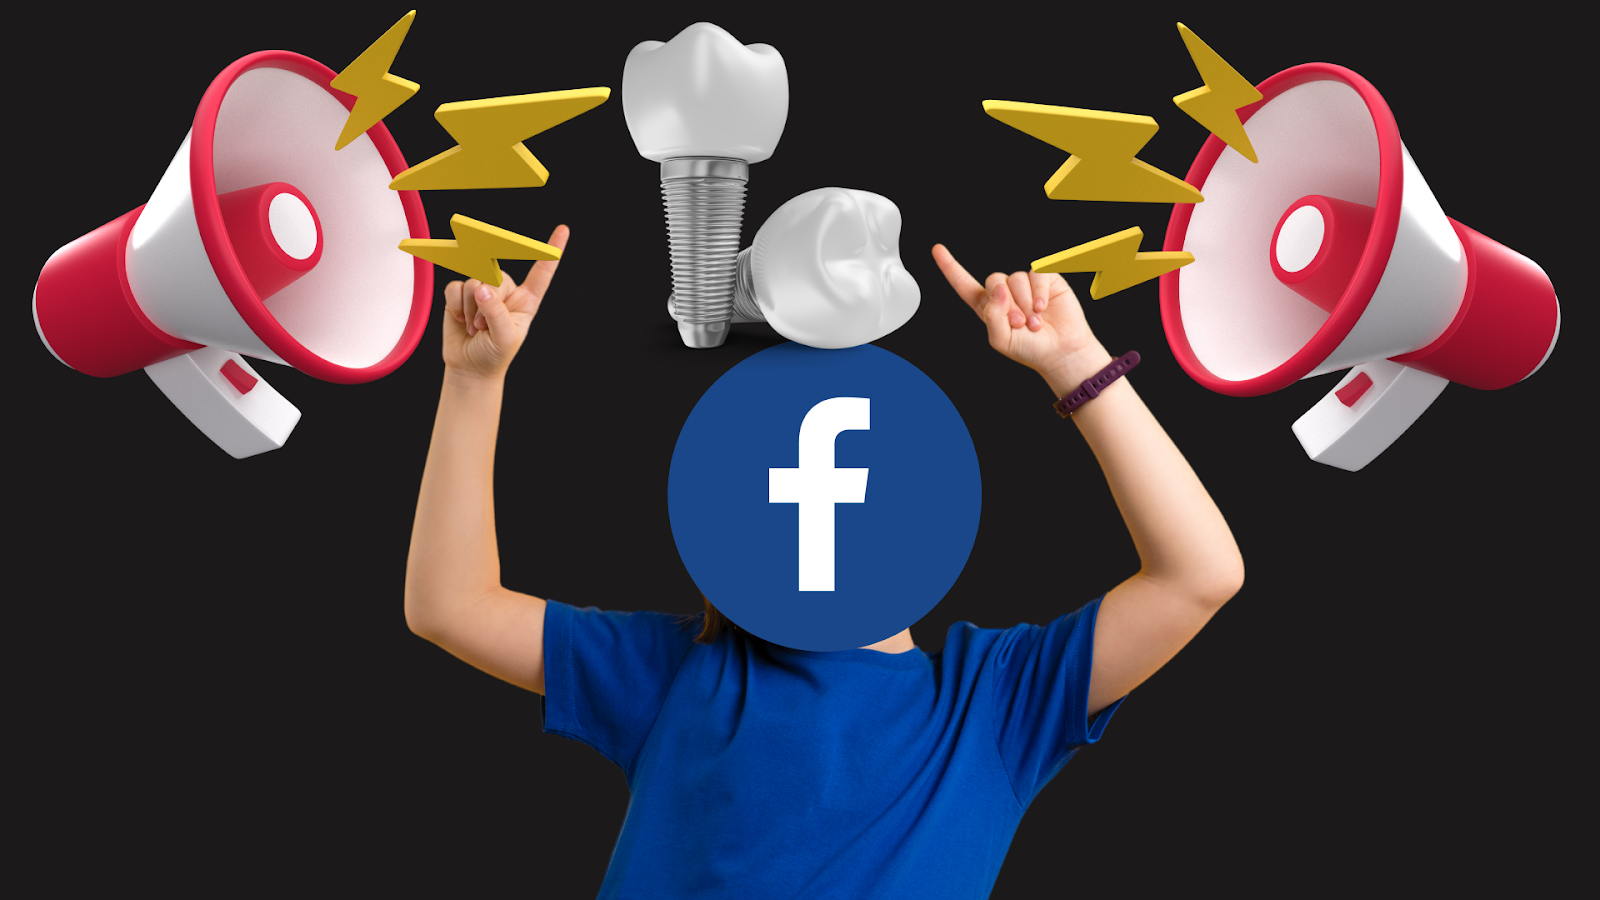 Dental Implant Marketing on Facebook – Research Is Key